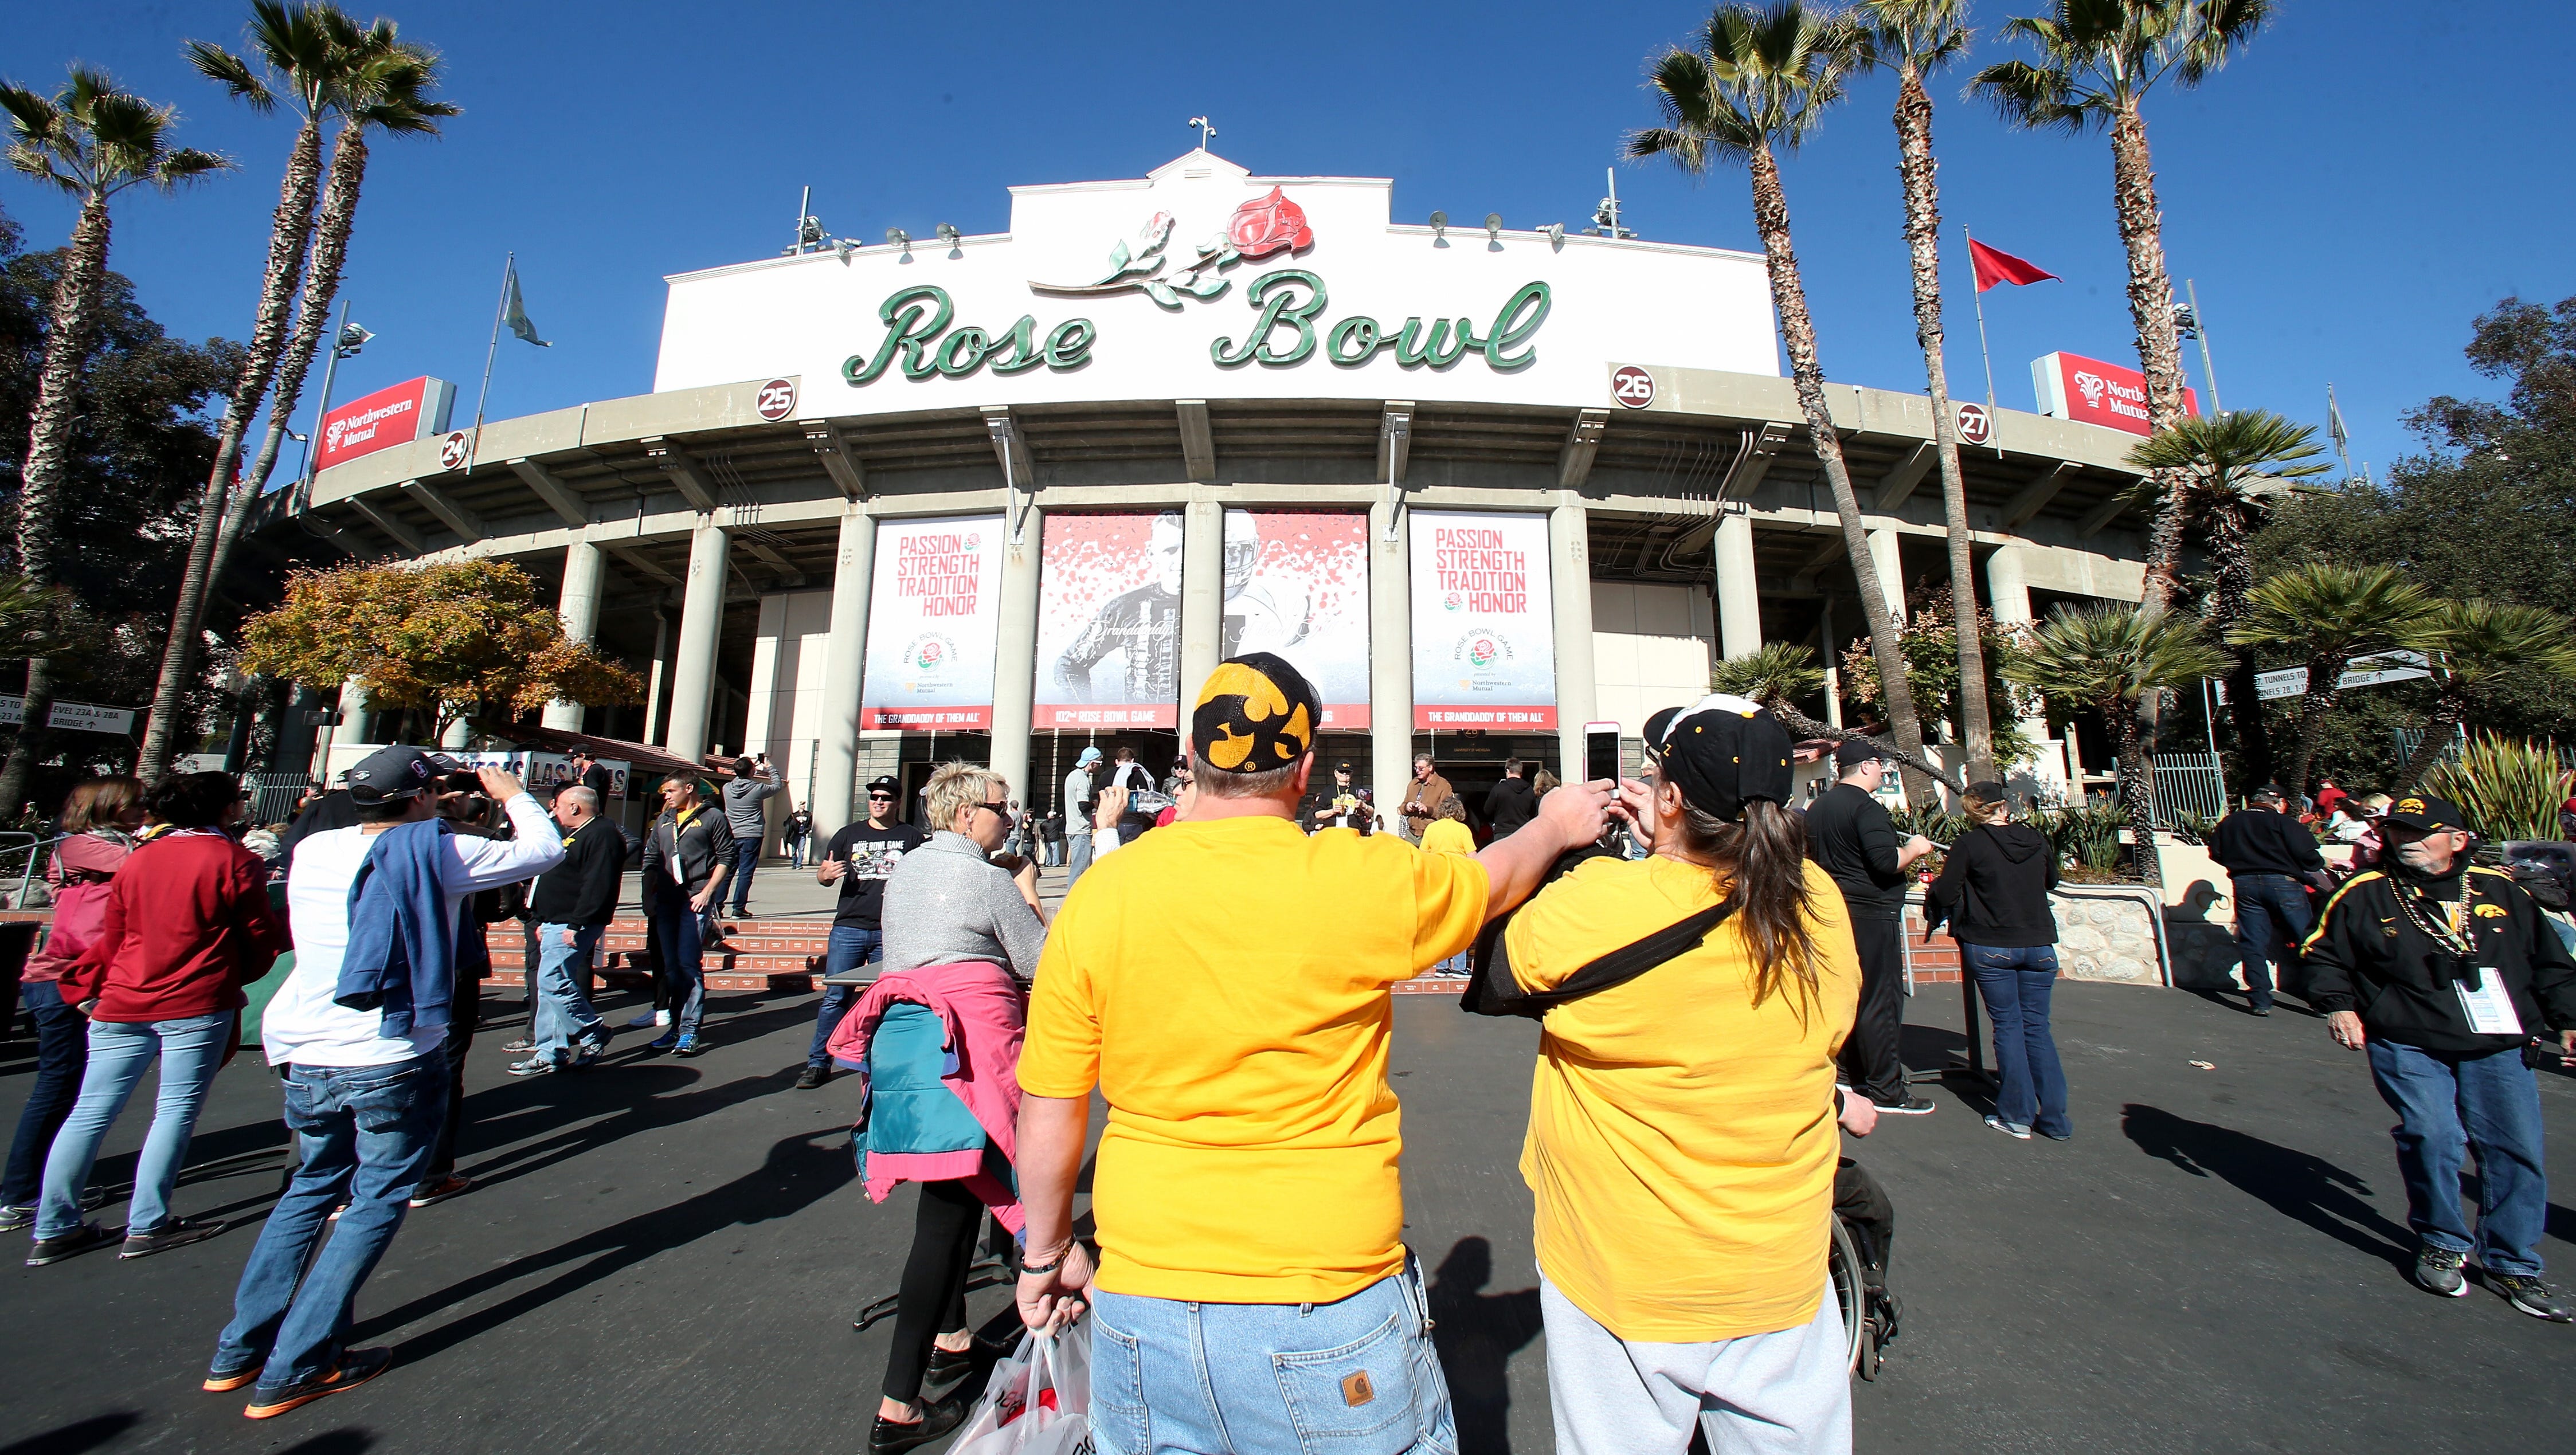 Iowa Hawkeyes fans pose outside the Rose Bowl before the 102nd Rose Bowl Game between the Hawkeyes and the Stanford Cardinal on January 1, 2016 at the Rose Bowl in Pasadena, California.